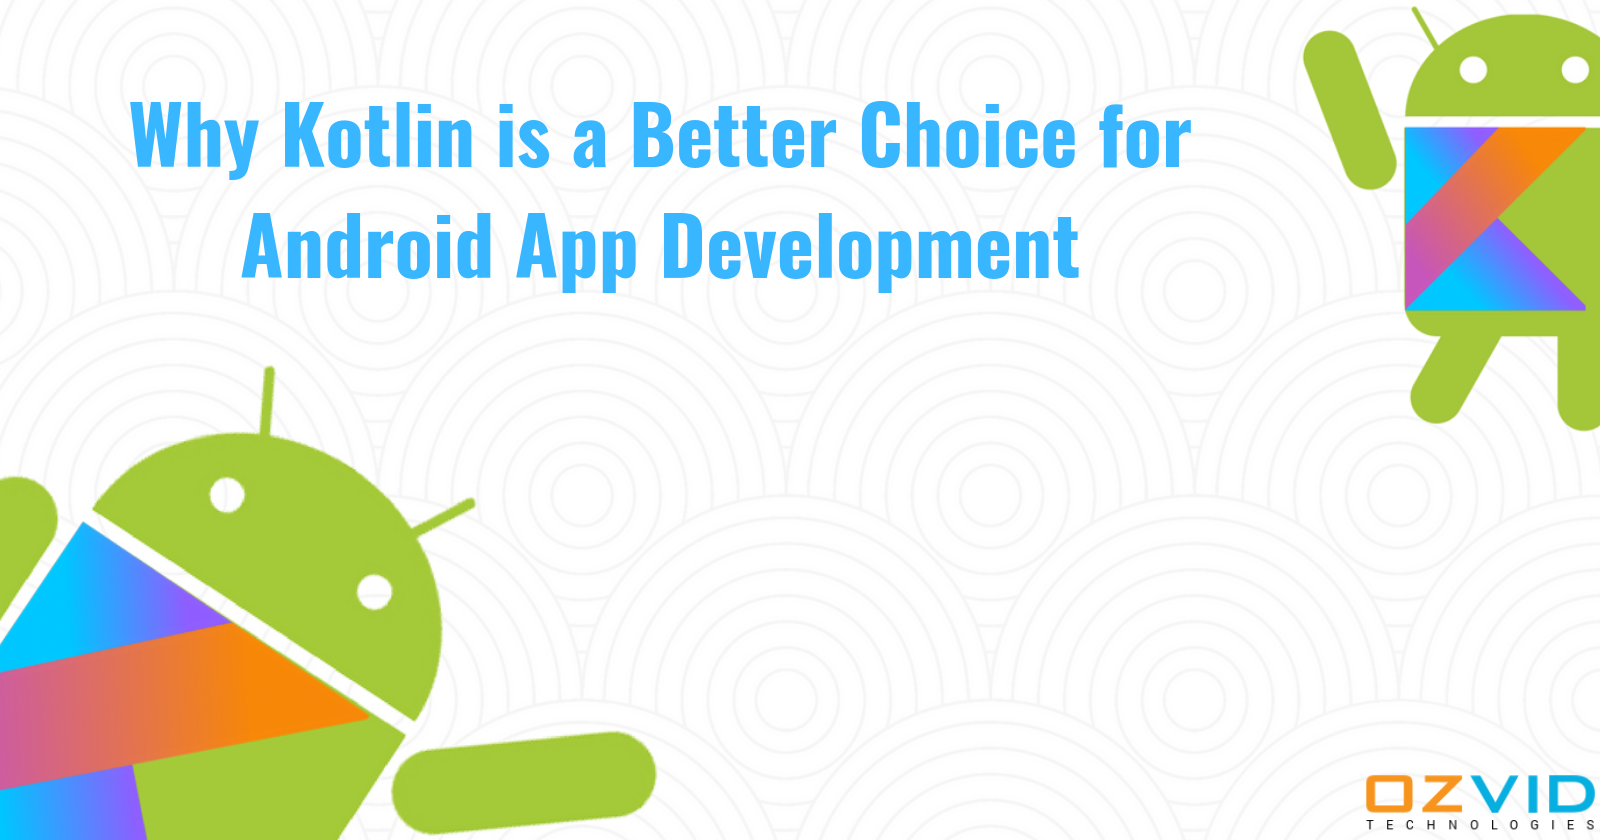 What Makes Kotlin the Future of Android App Development